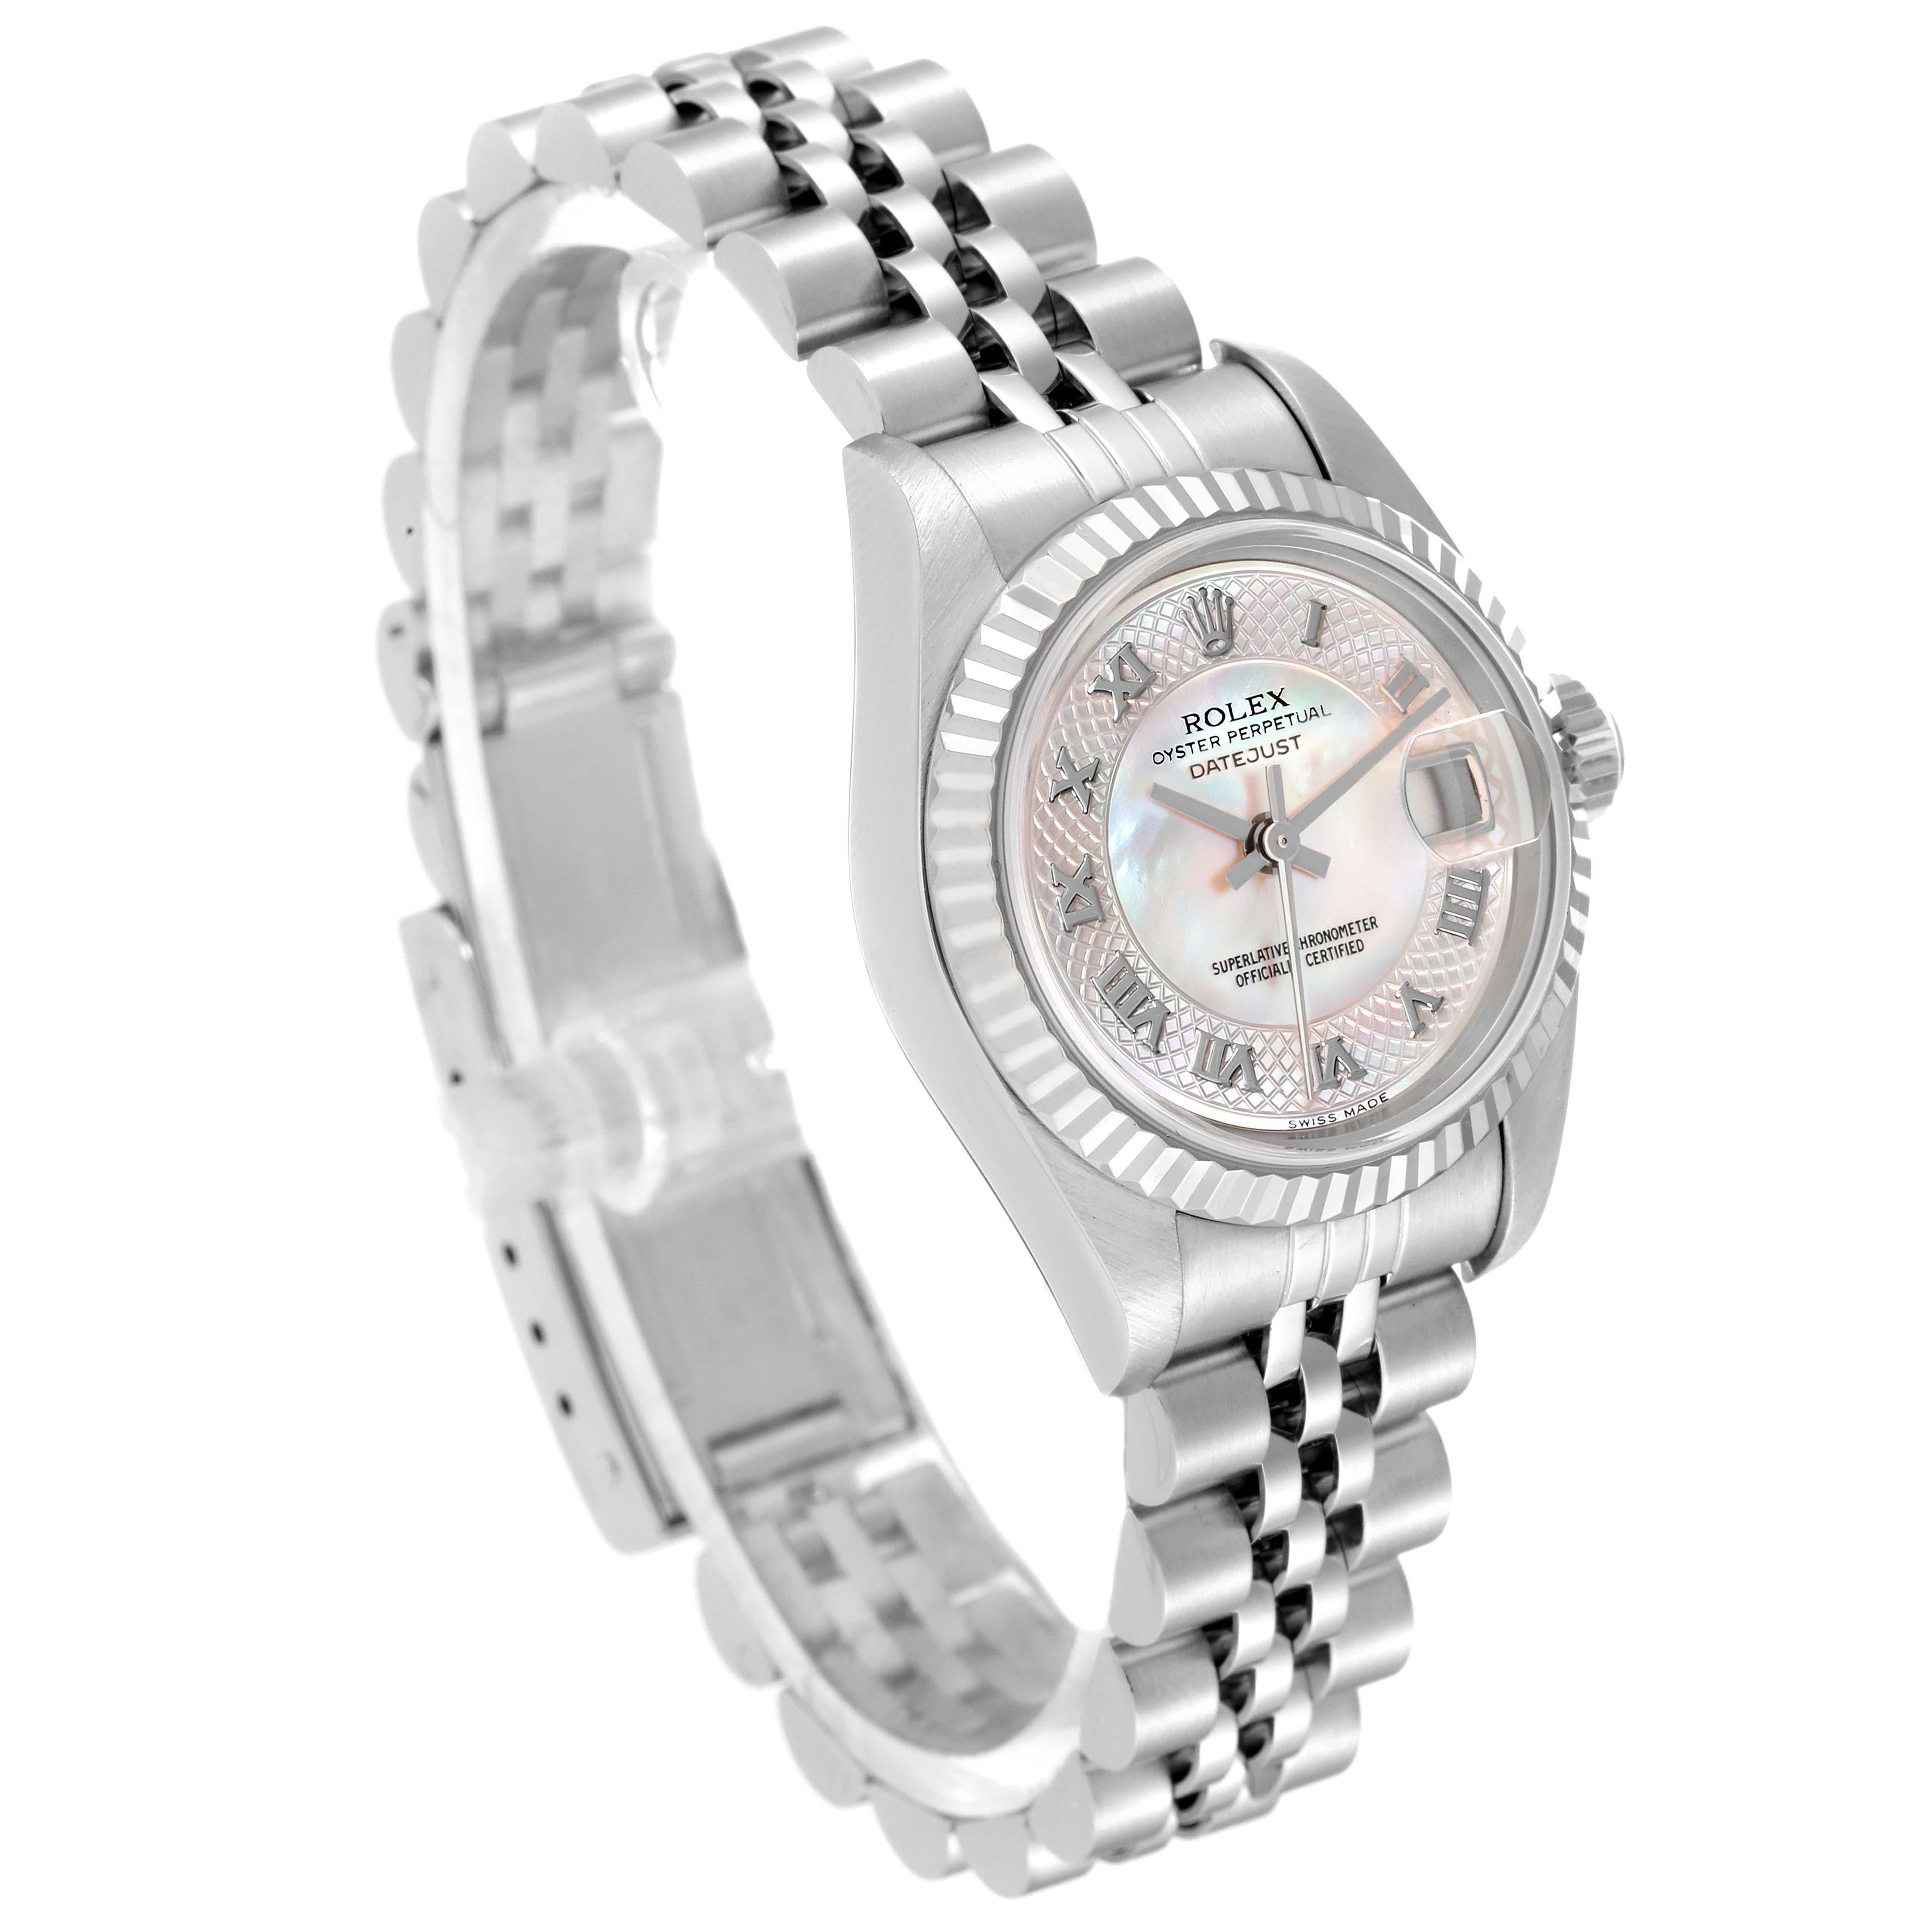 Rolex Datejust Steel White Gold Decorated Mother Of Pearl Ladies Watch 79174 In Excellent Condition For Sale In Atlanta, GA